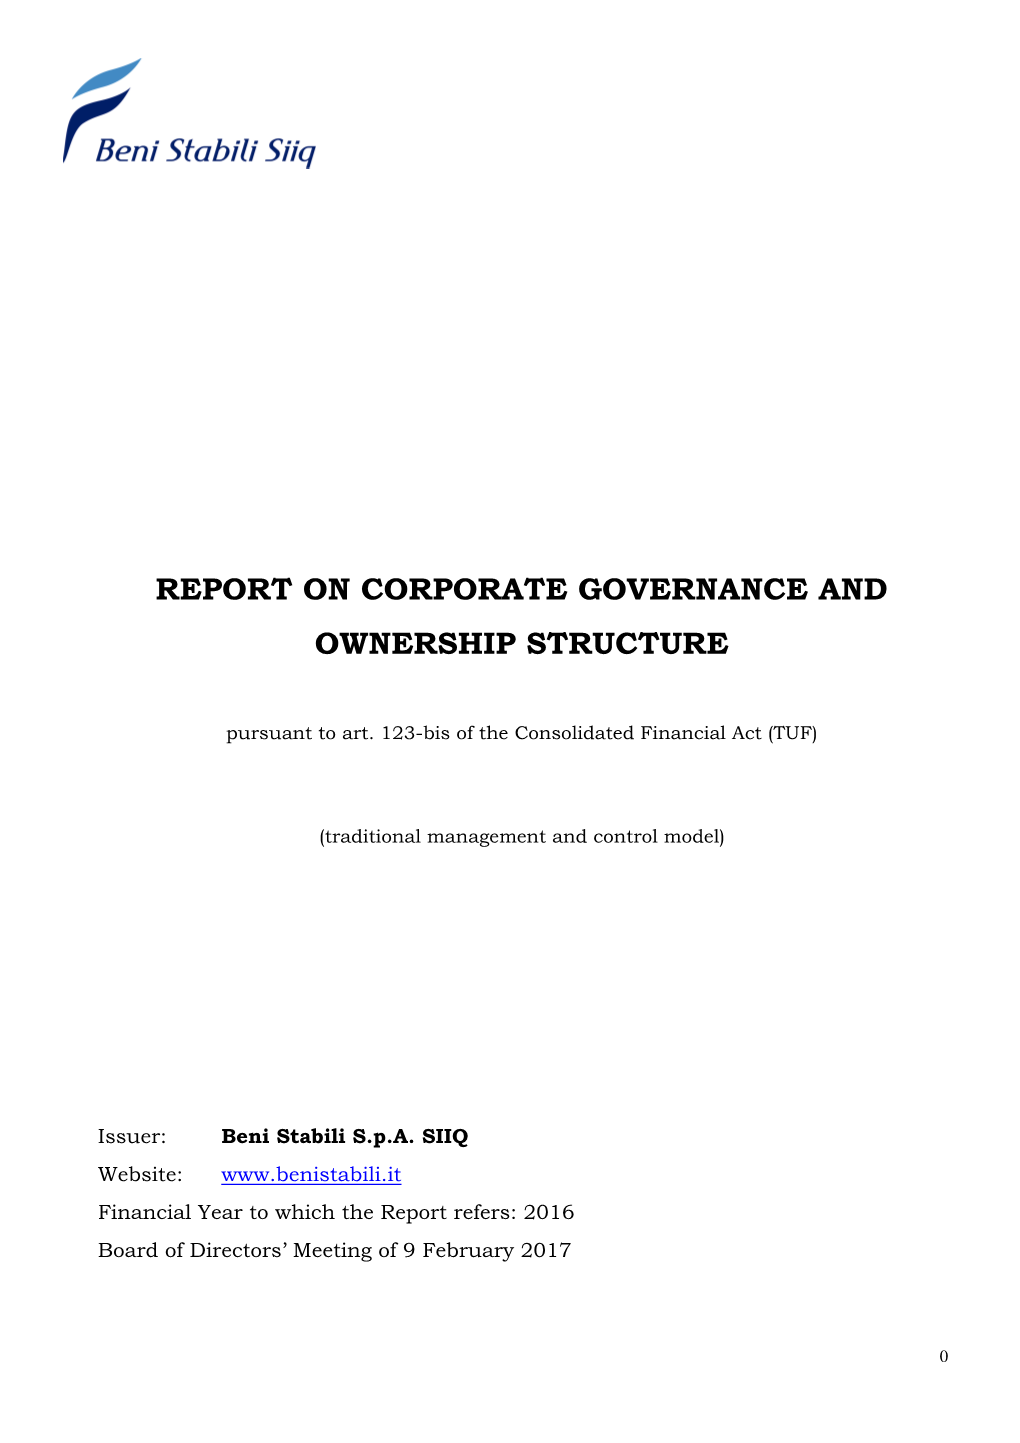 Report on Corporate Governance and Ownership Structure